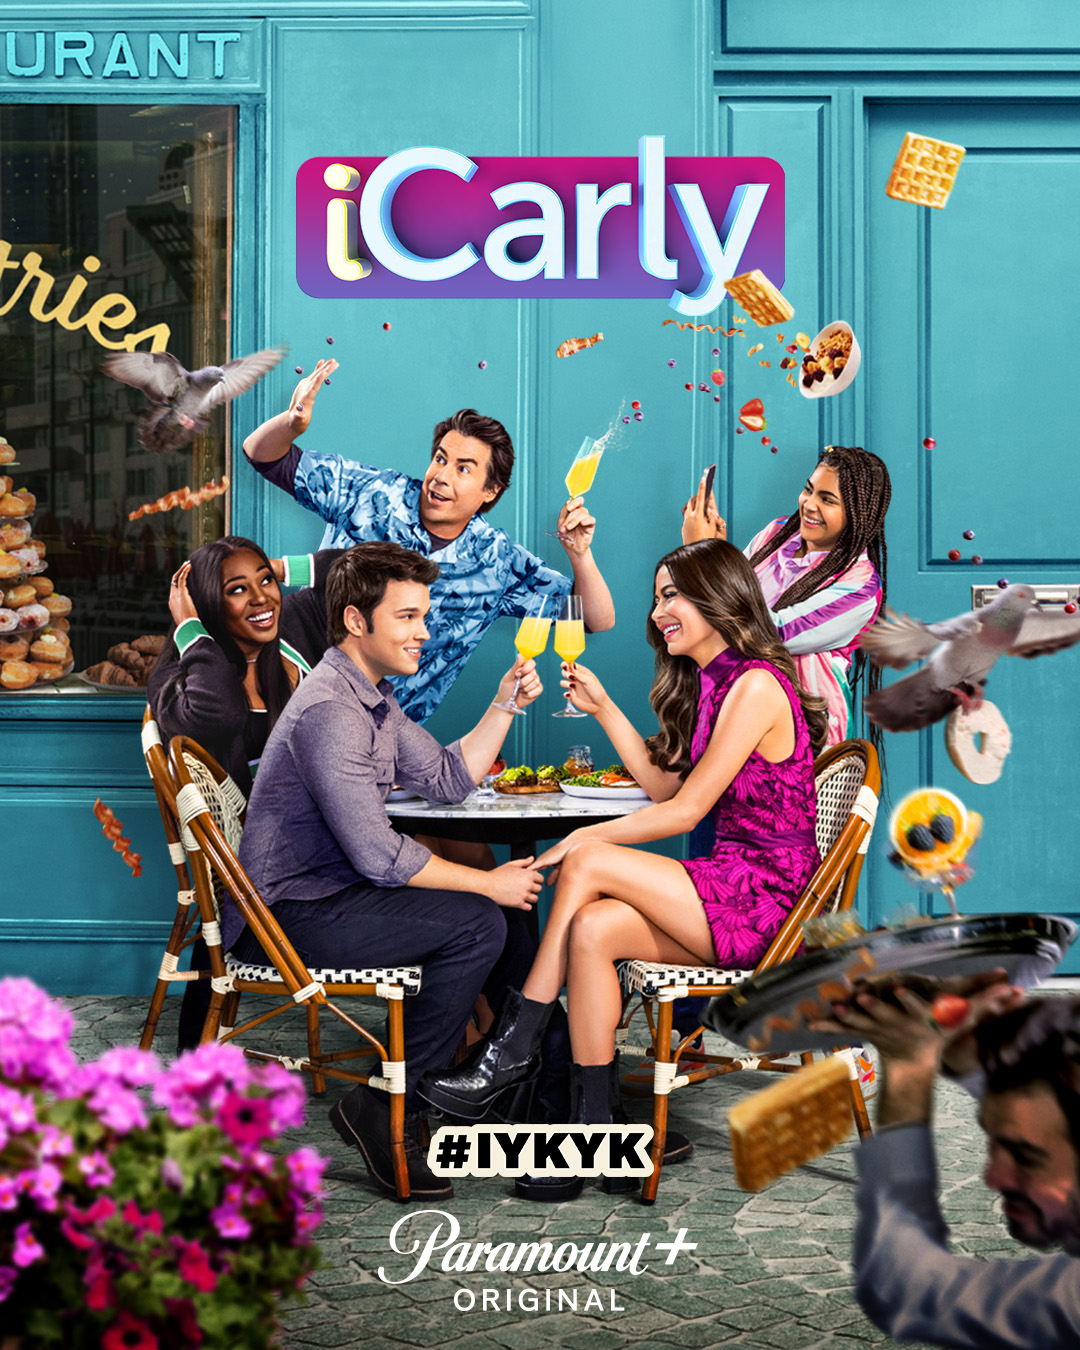 8 Differences Between the Upcoming iCarly Reboot and the Original Show